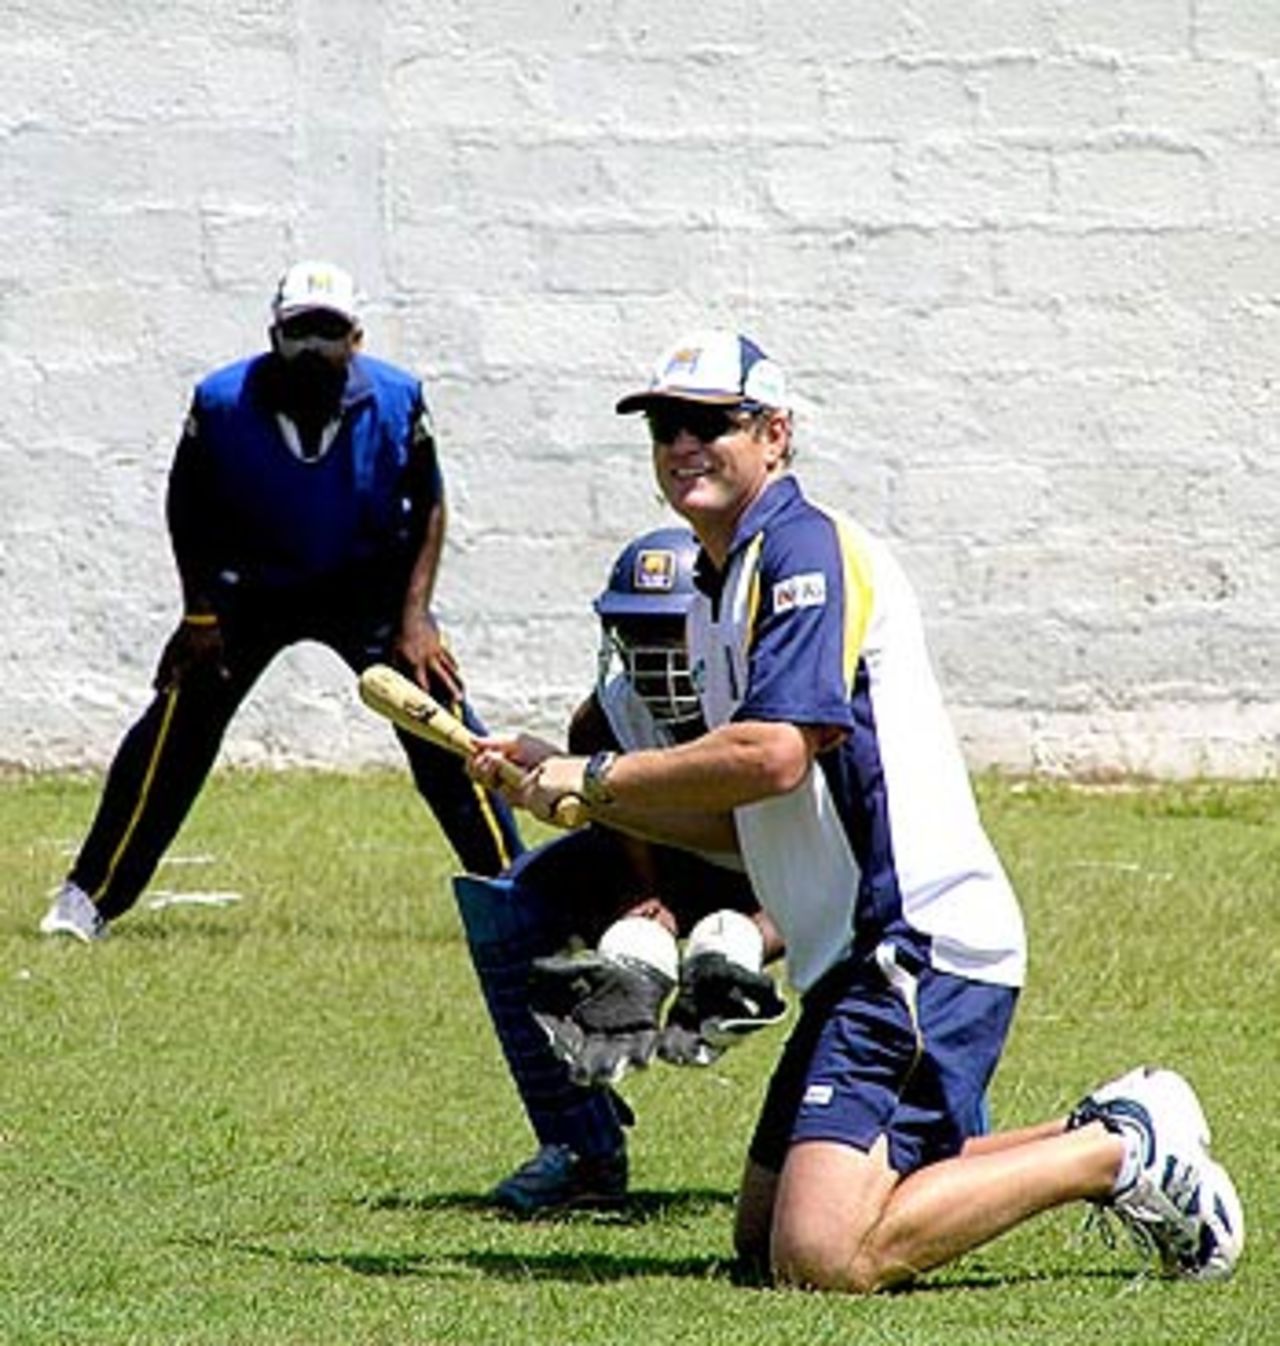 Tom Moody gives slip-catching practice with a baseball bat, Colombo, September 27, 2006